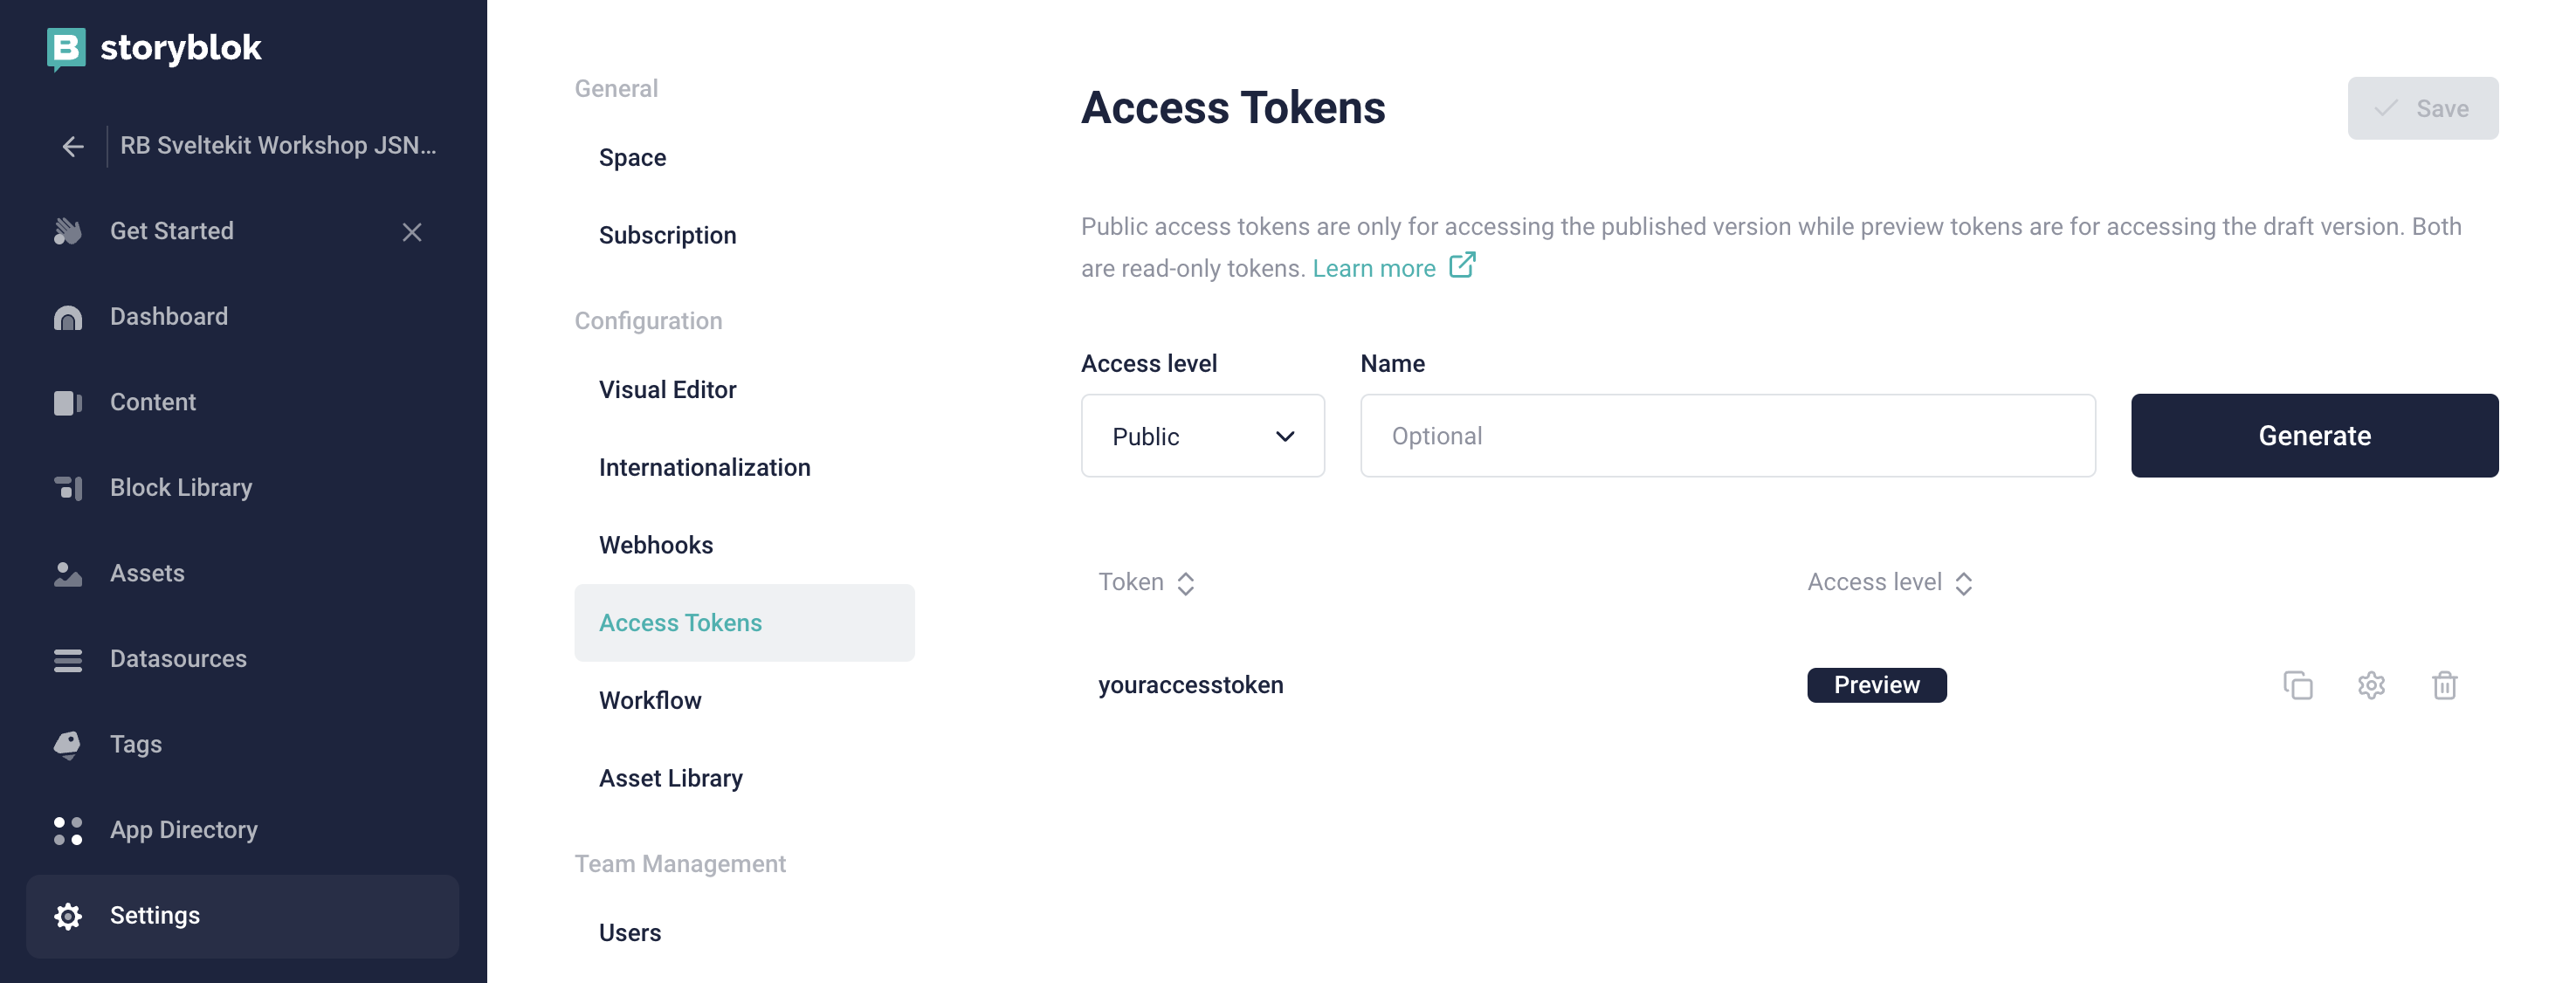 Getting the Access Token